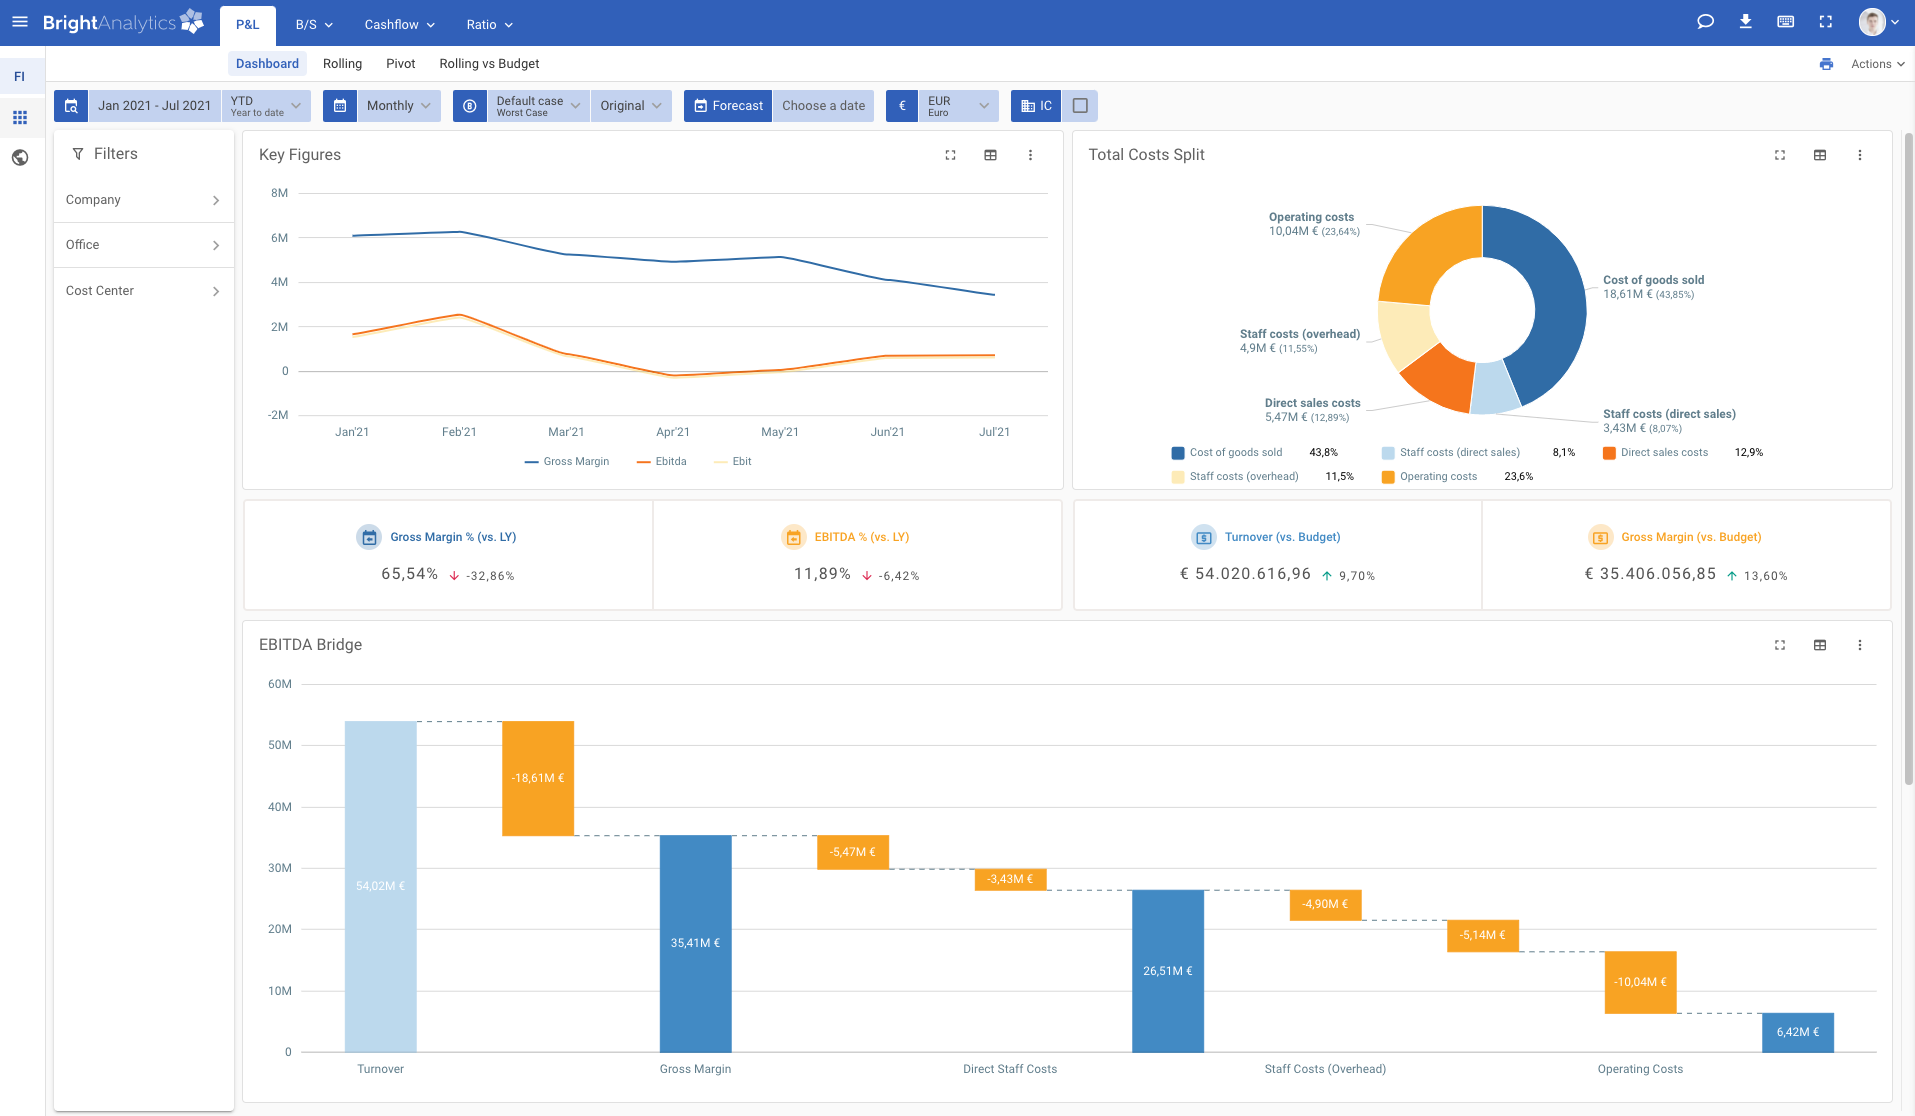 InfoSuite alternative - Intuitive and user-friendly interface of BrightAnalytics